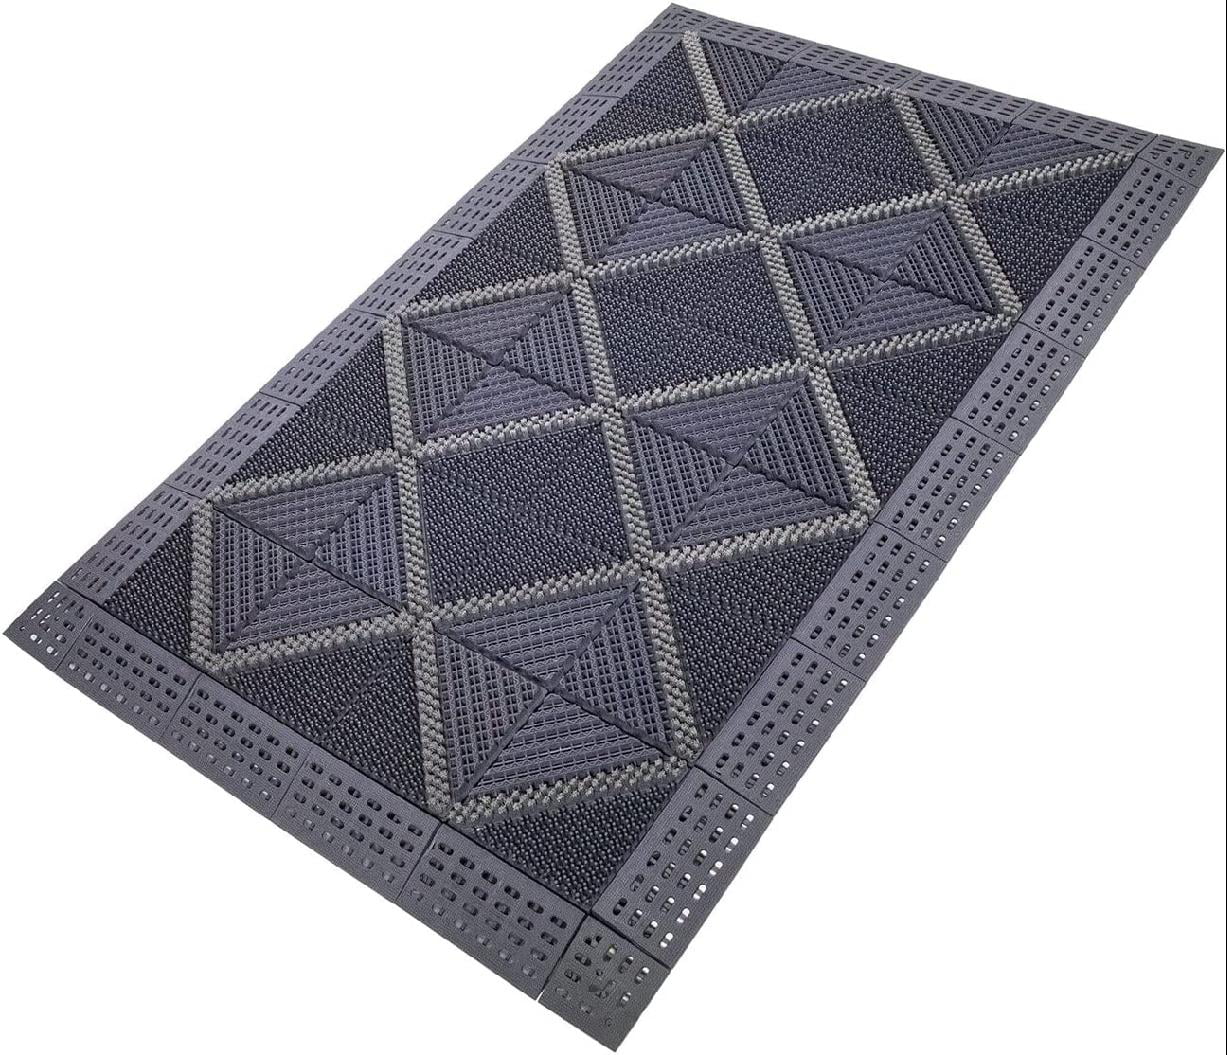 Outdoor Rubber Mats with Drainage, Rubber Drainage Mat,Outdoor Mats for  Back Door, Waterproof, Interlocking Rubber Mats, Easy Clean Rug Mats for  Entry, Patio, Pool, Assembly, 